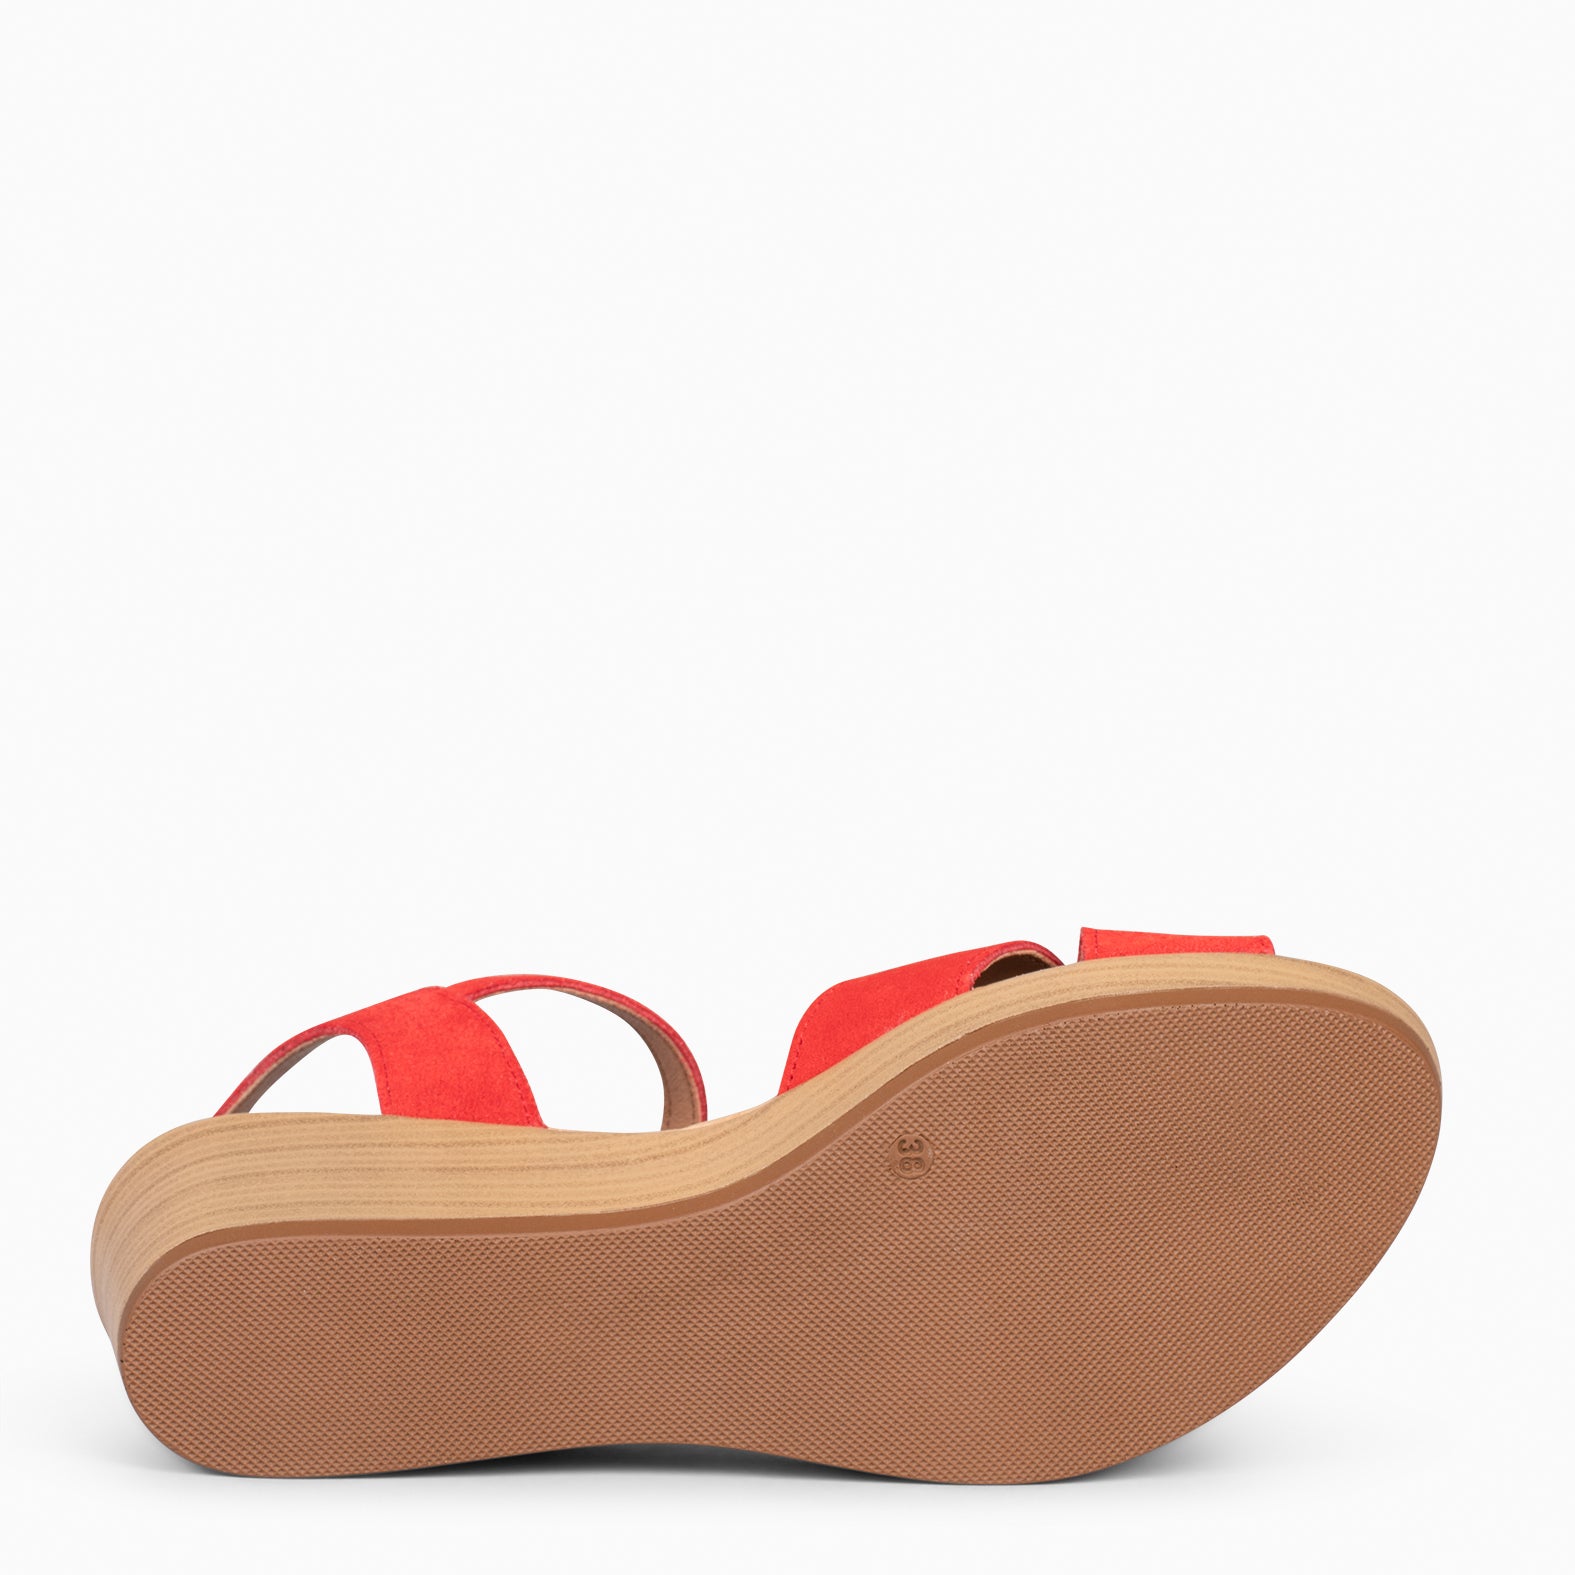 MAR – RED WEDGE SHOES